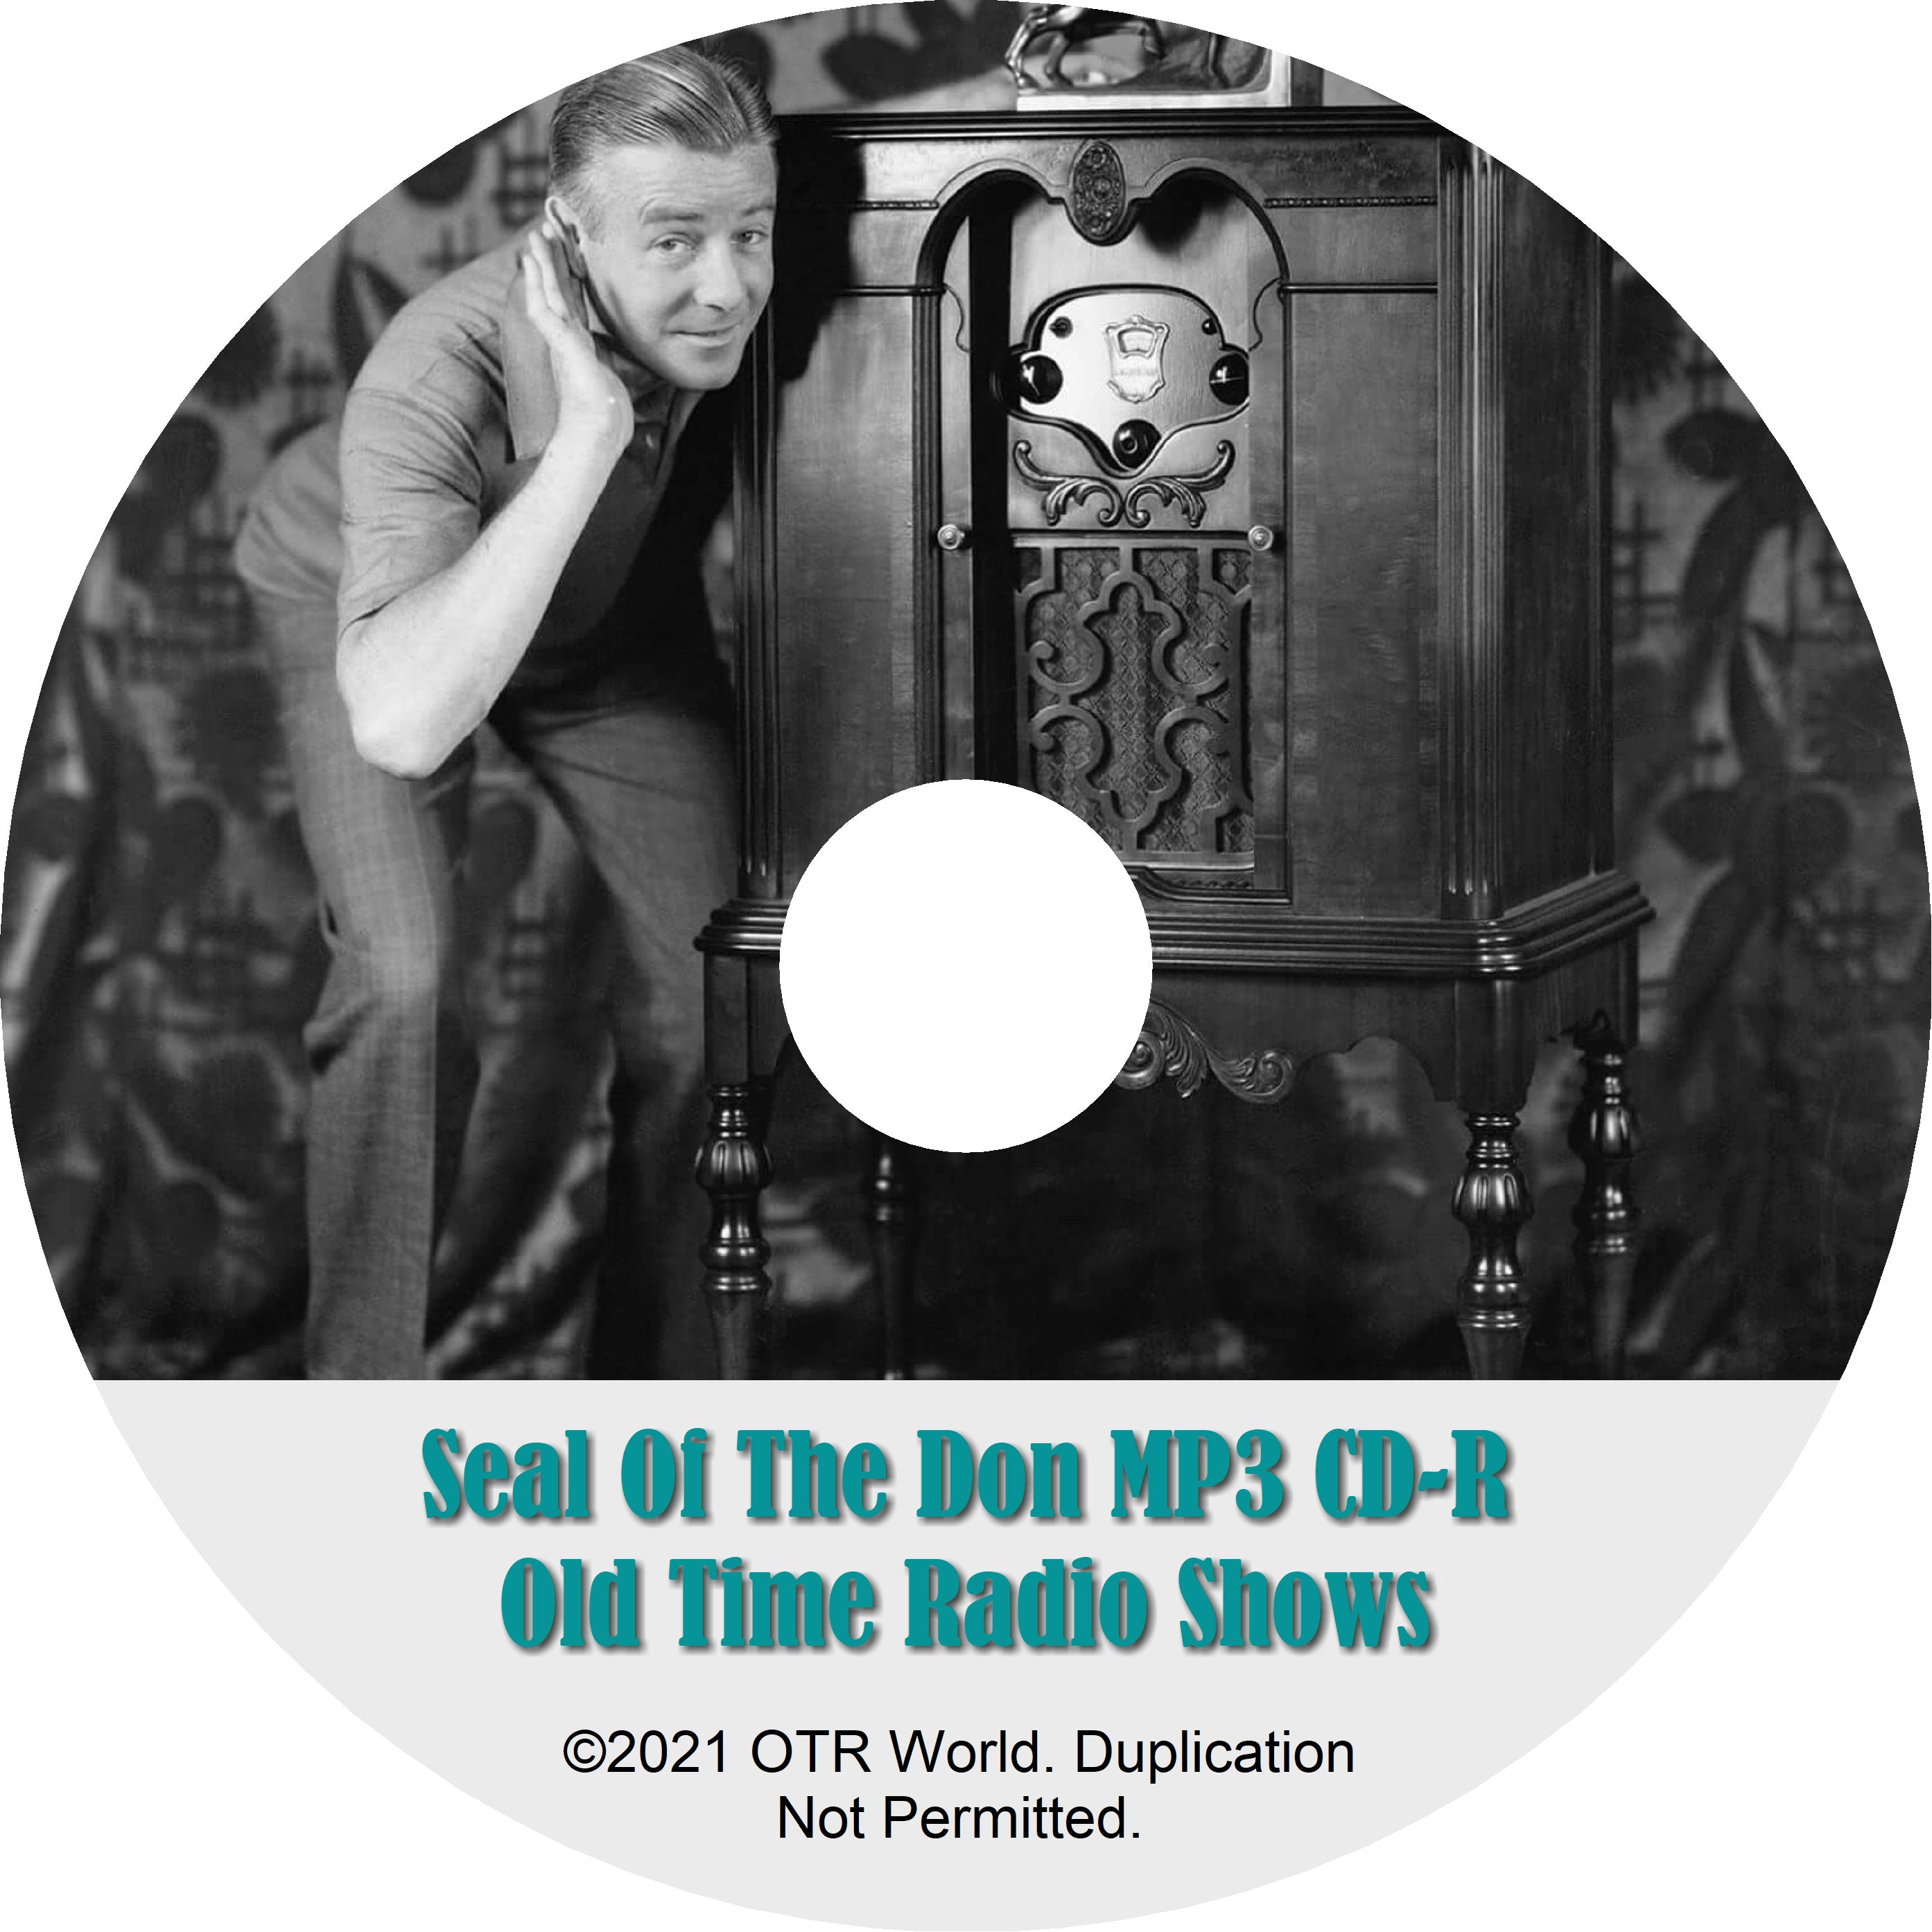 Seal Of The Don OTRS OTR Old Time Radio Shows MP3 On CD-R 2 Episodes